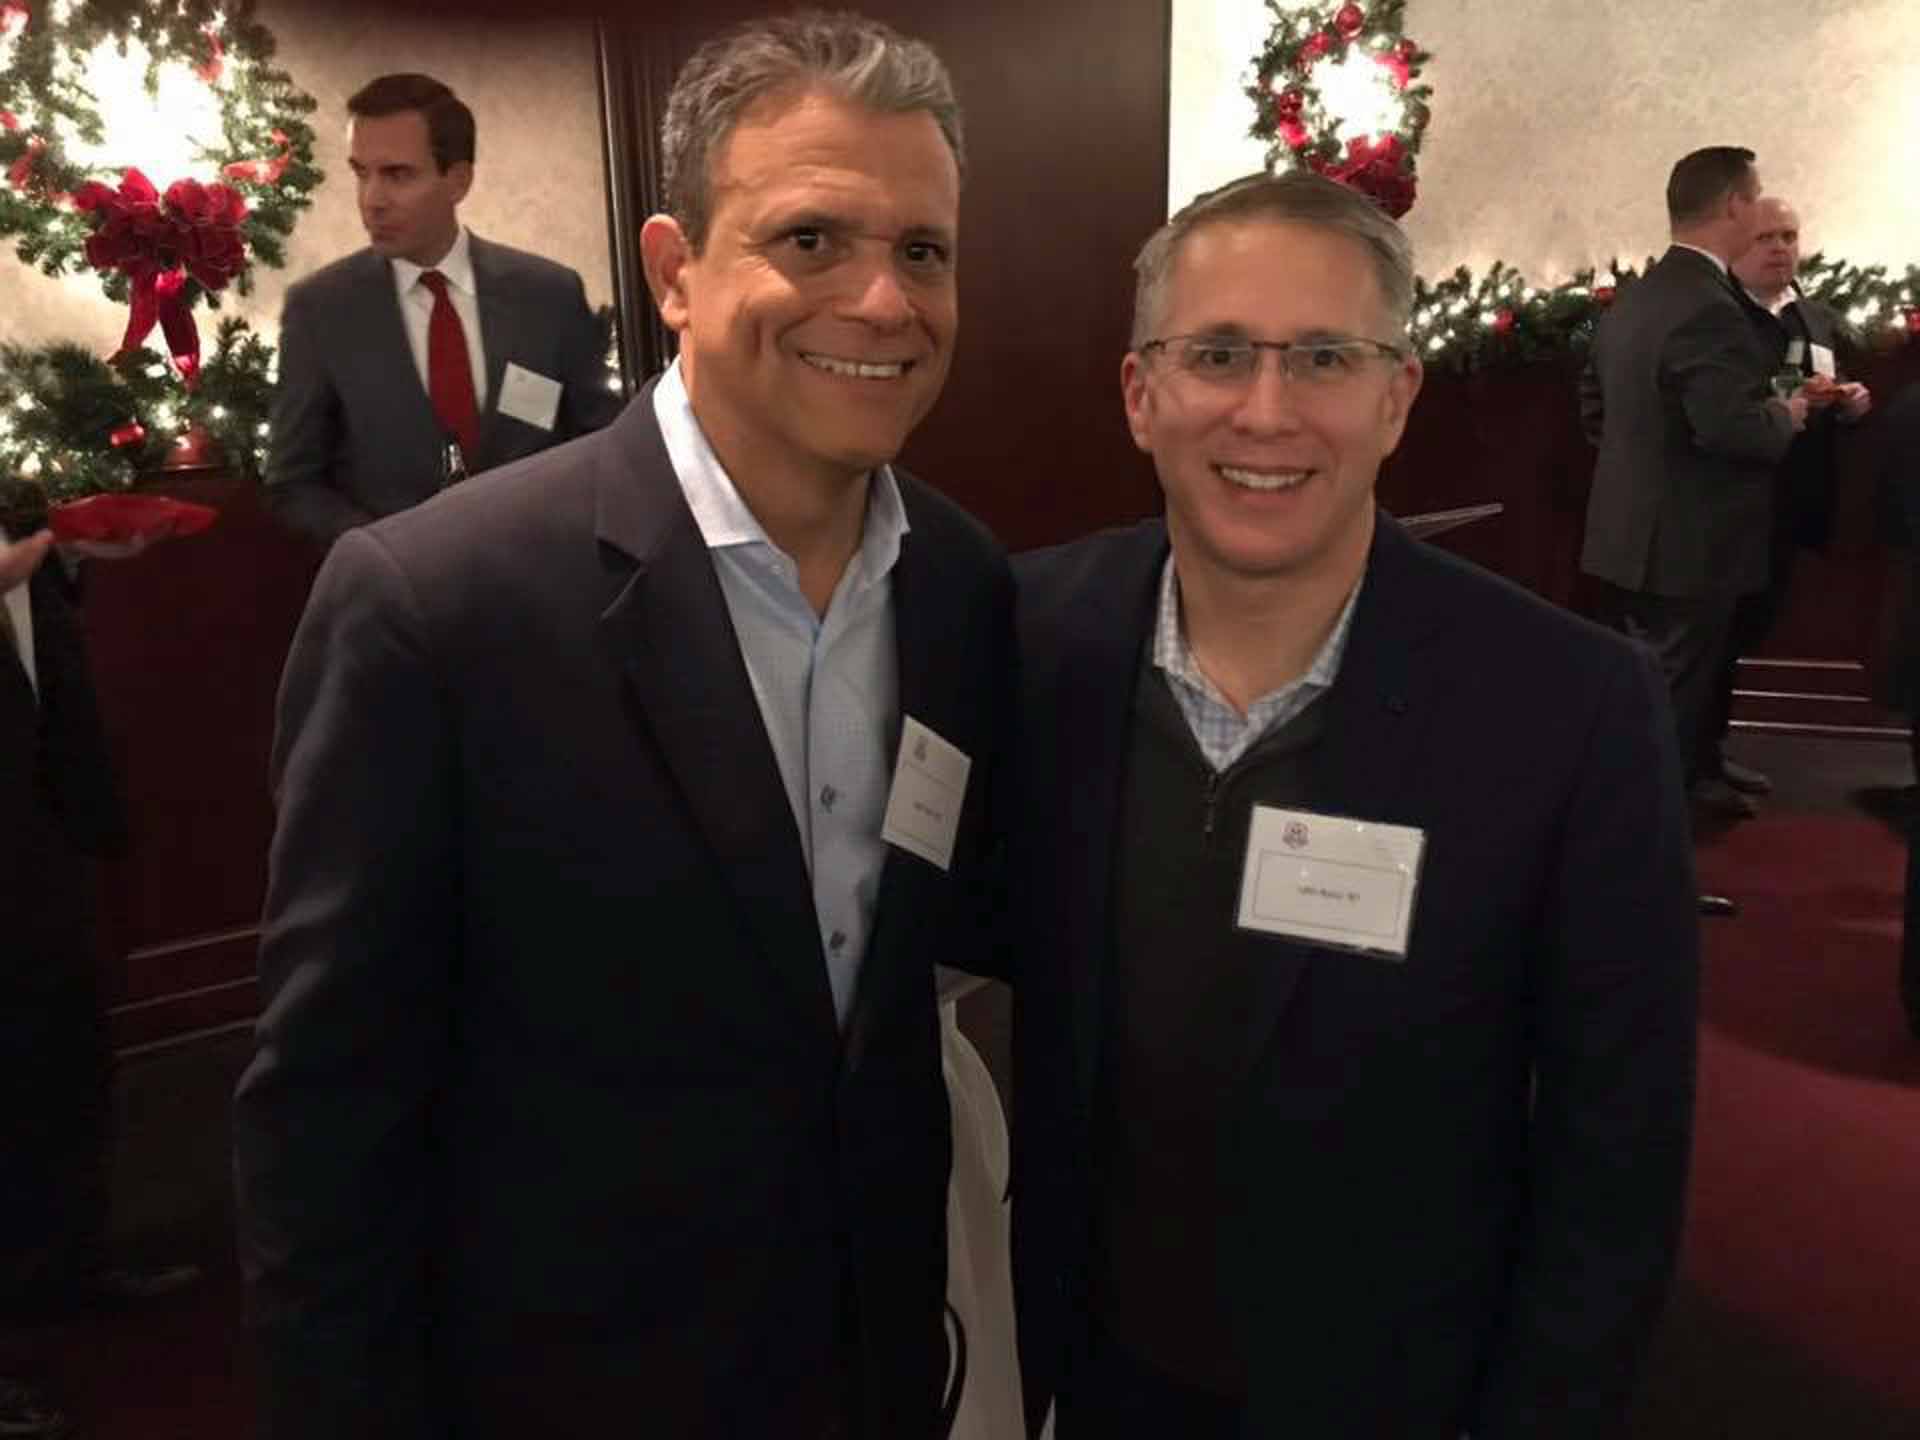 law-association-christmas-social-2019-two-people-smiling